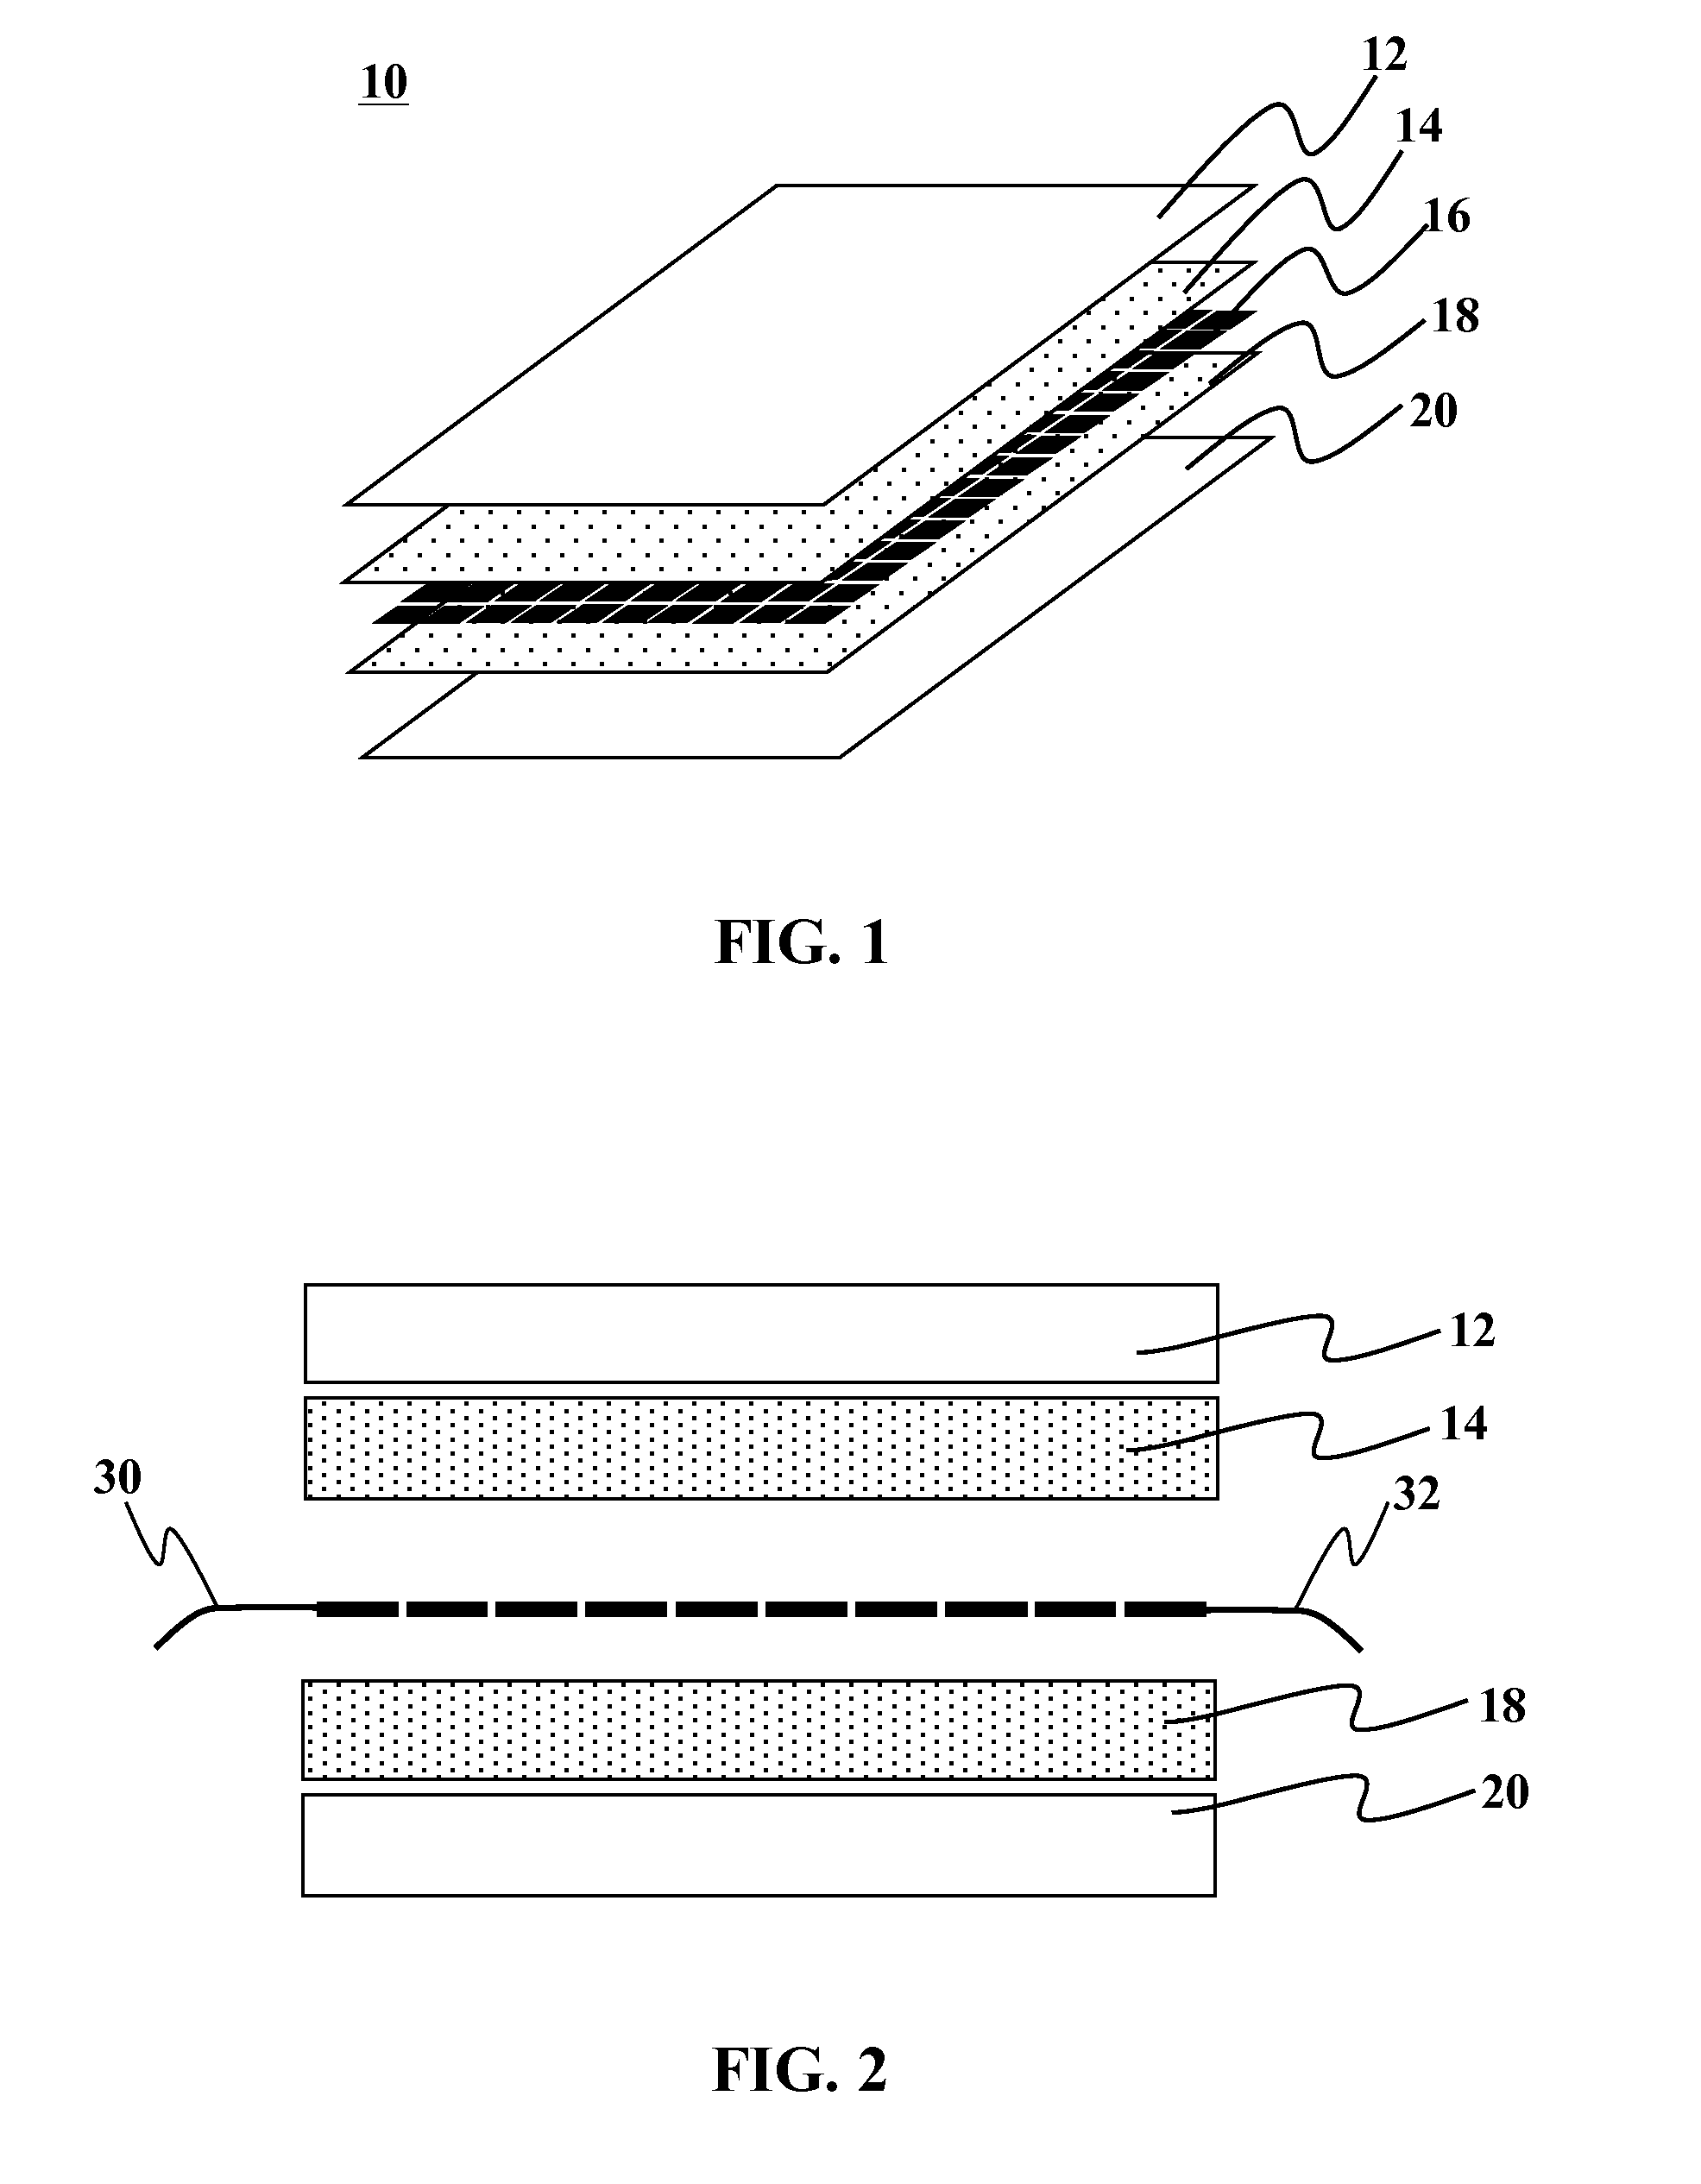 Rapid mounting system for solar modules